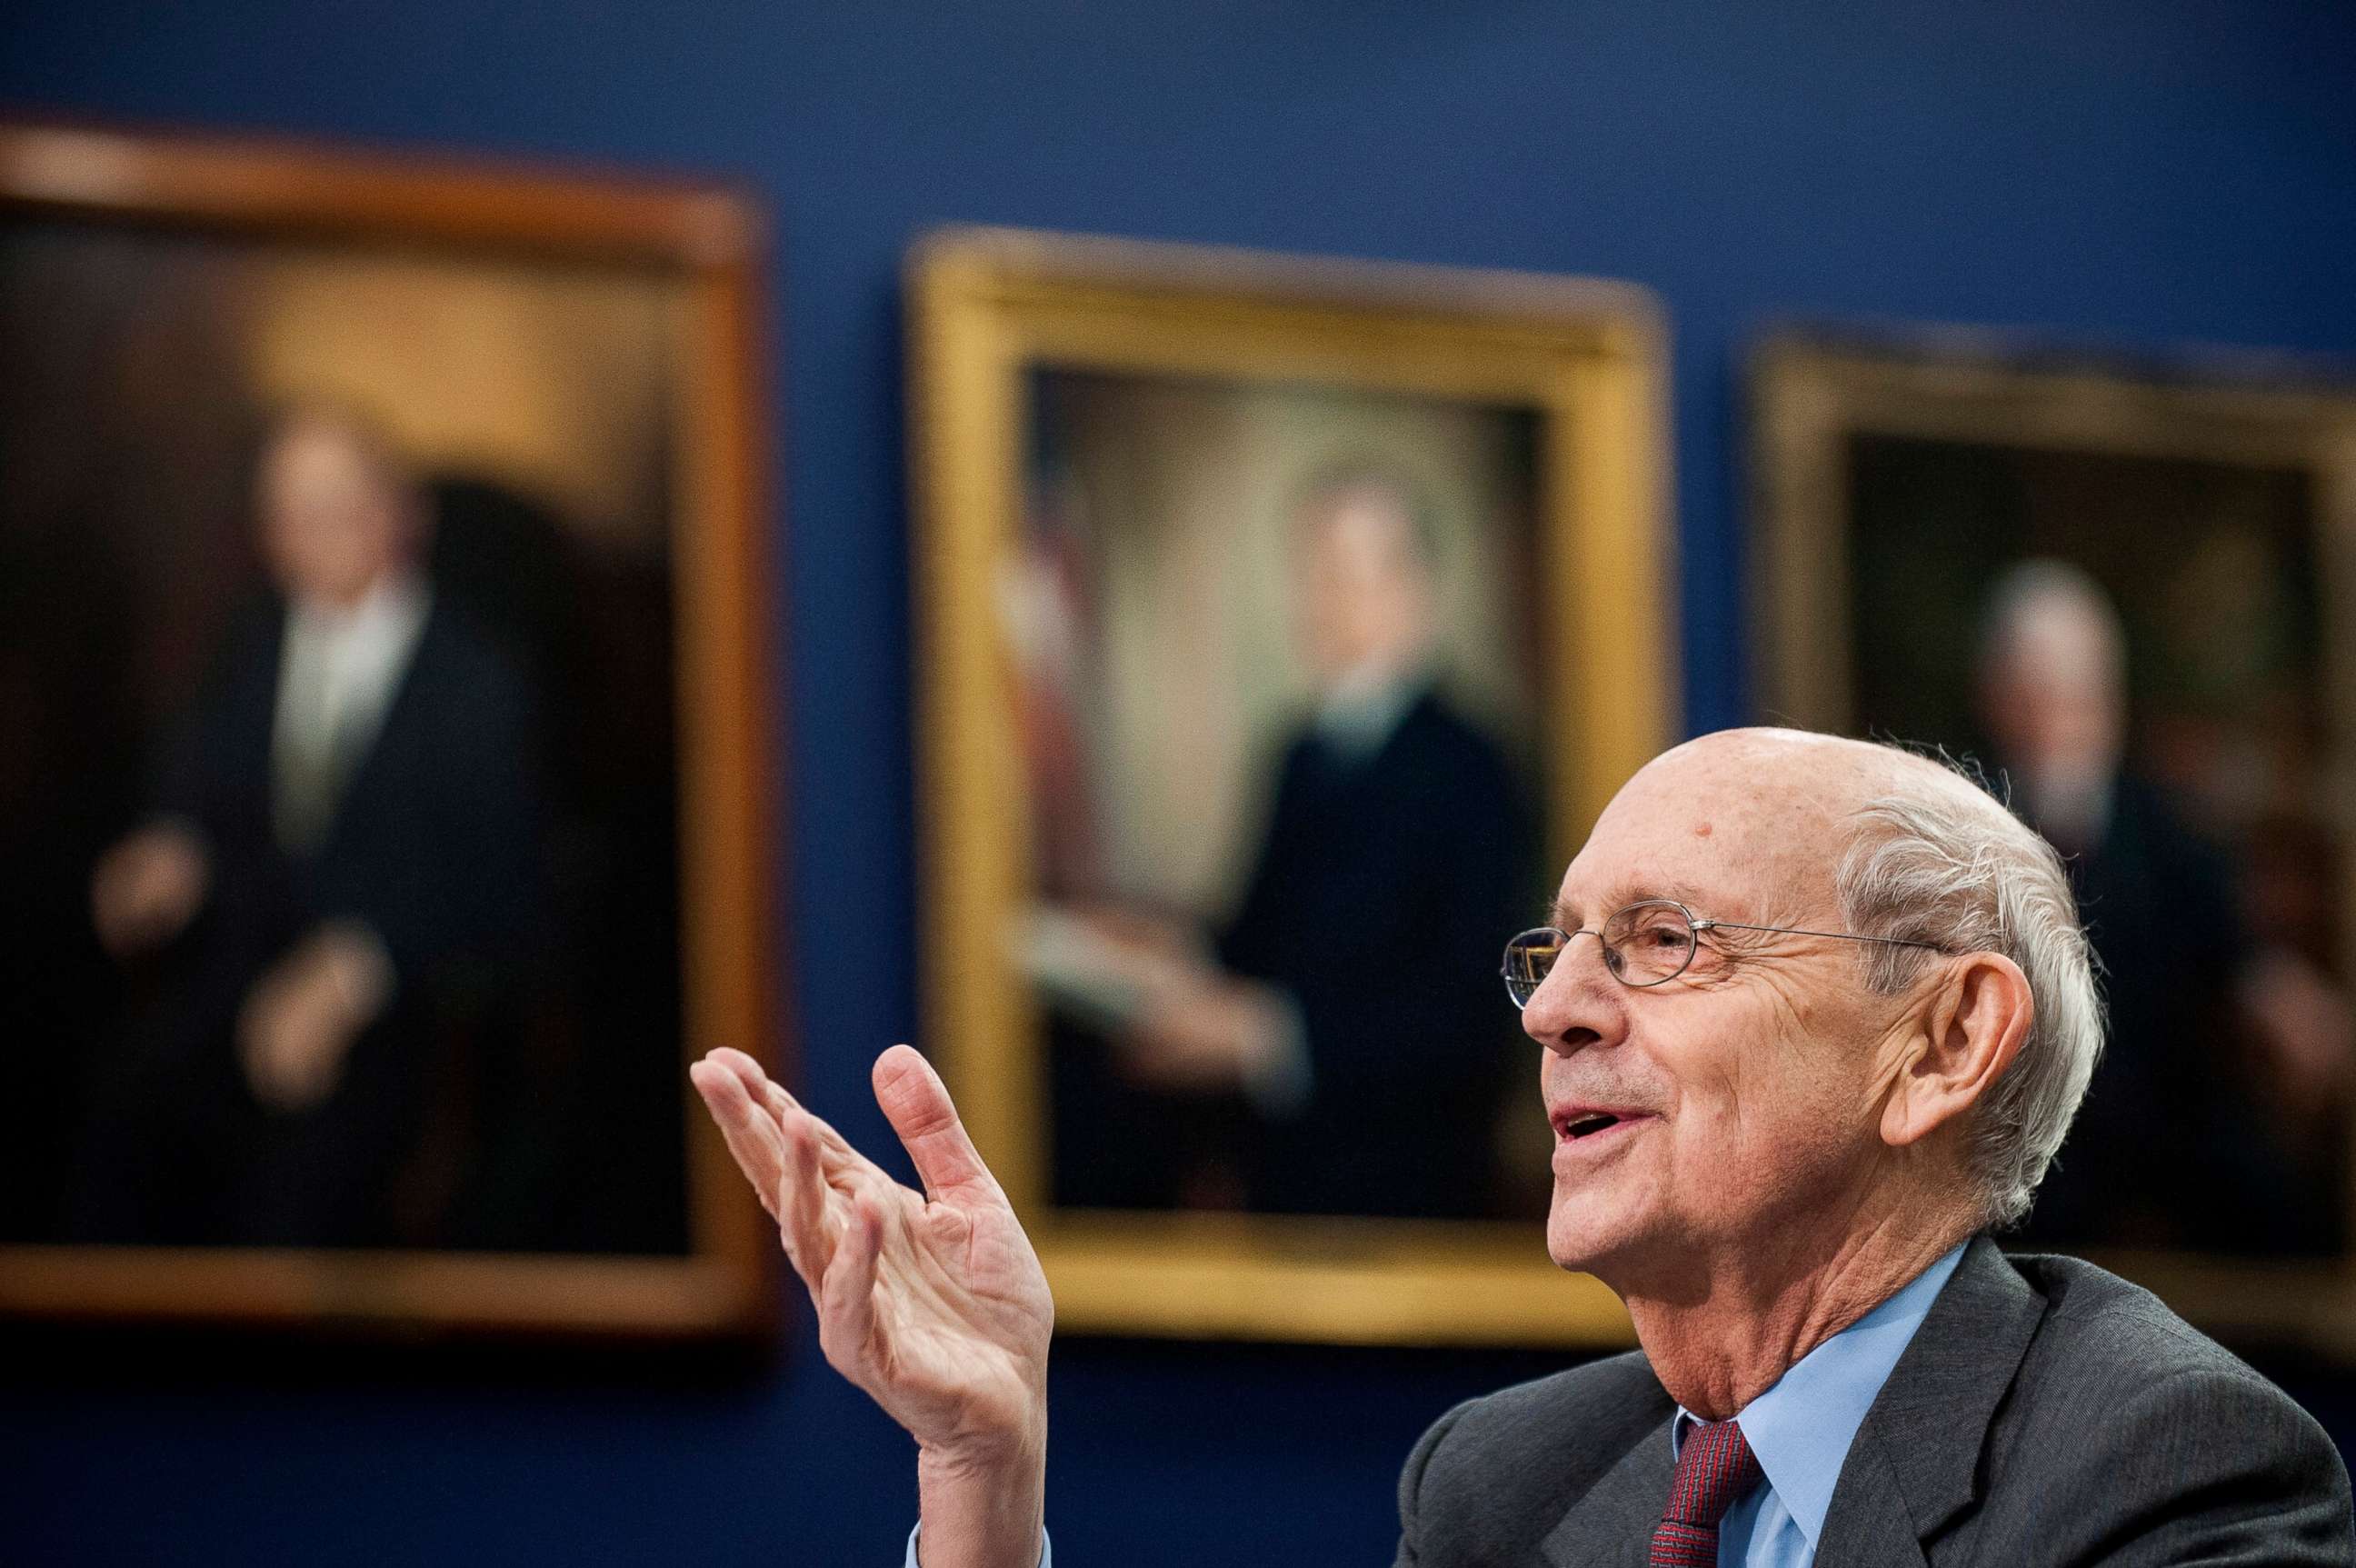 PHOTO: U.S. Supreme Court Justice Stephen Breyer testifies during a Financial Services and General Government Subcommittee in Washington, March 23, 2015.